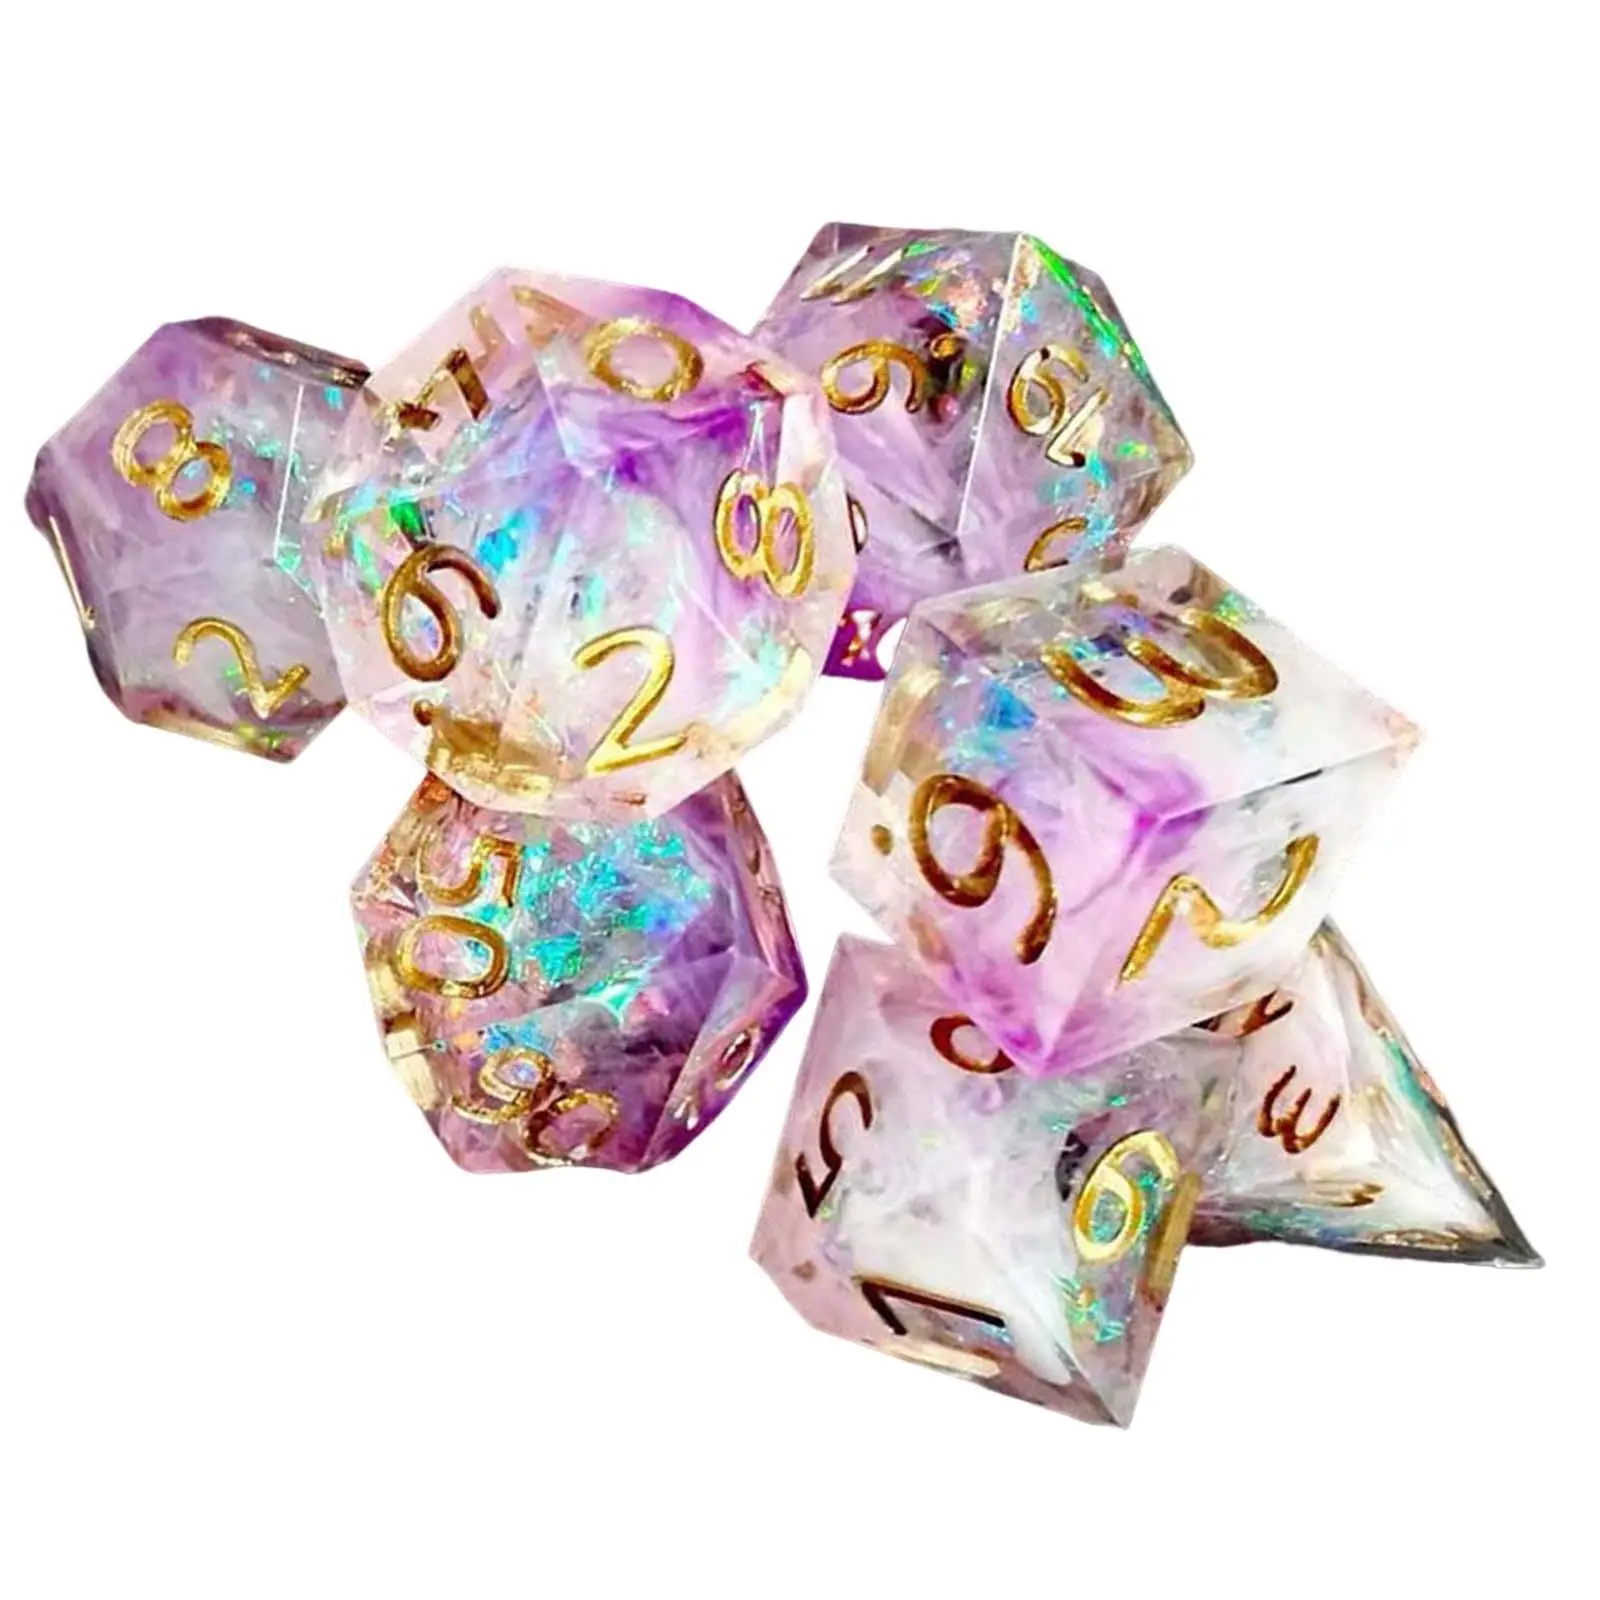 7 Pieces Transparent Polyhedral Dice D4 D6 D8 D10 D12 D20 7-Die DND Role Playing Game Dice Set for MTG Board Game Table Games